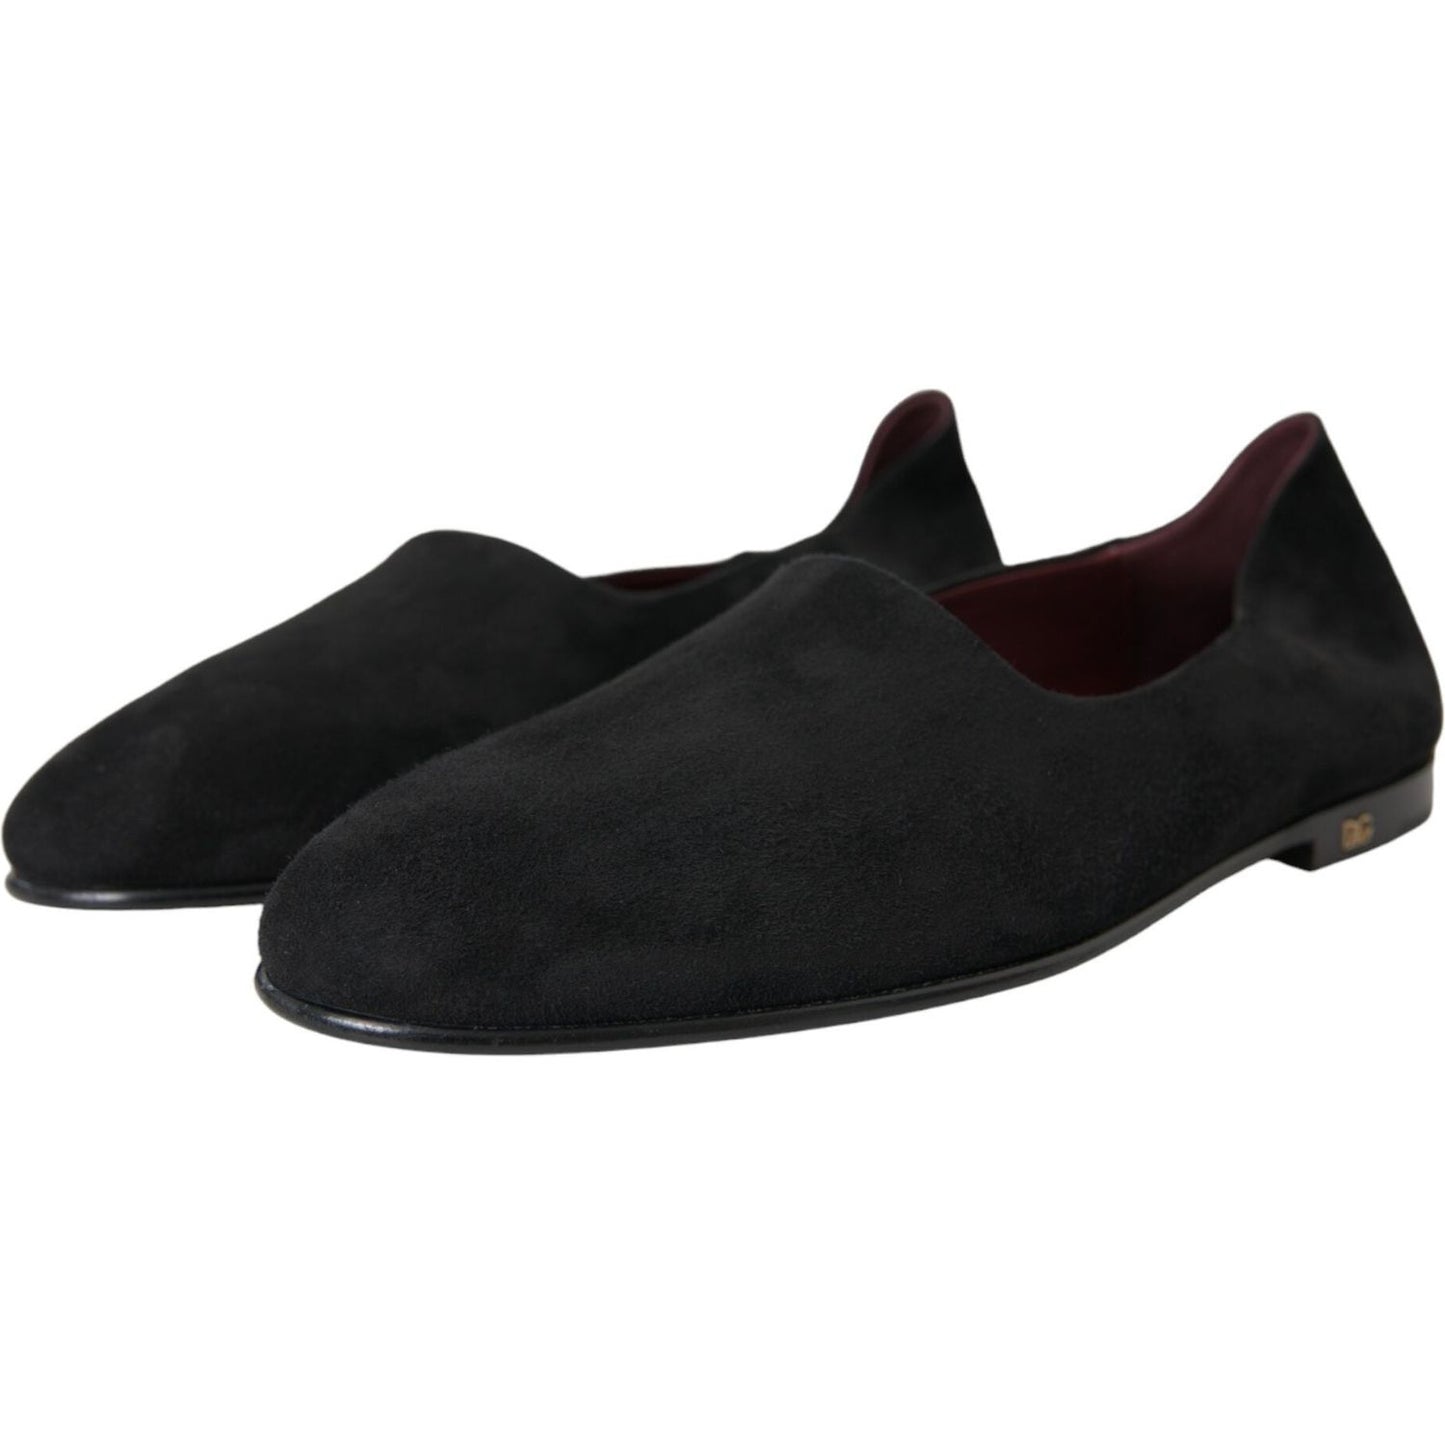 Dolce & Gabbana Black Suede Loafers Formal Dress Slip On Shoes black-suede-loafers-formal-dress-slip-on-shoes